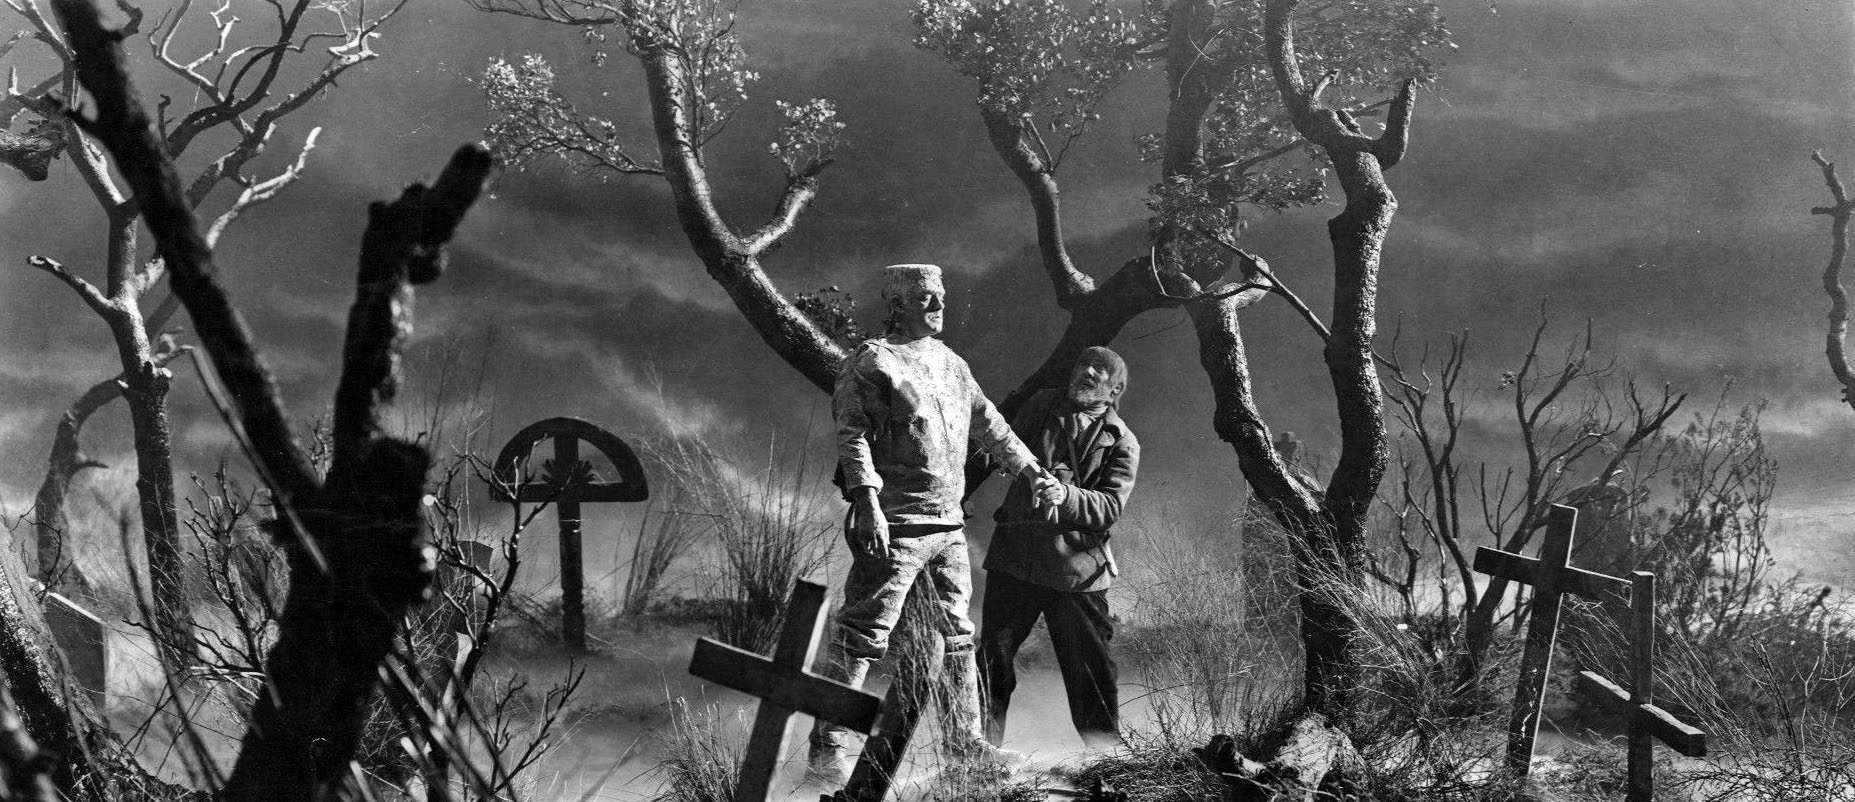 Bela Lugosi and Lon Chaney Jr. in The Ghost of Frankenstein (1942)